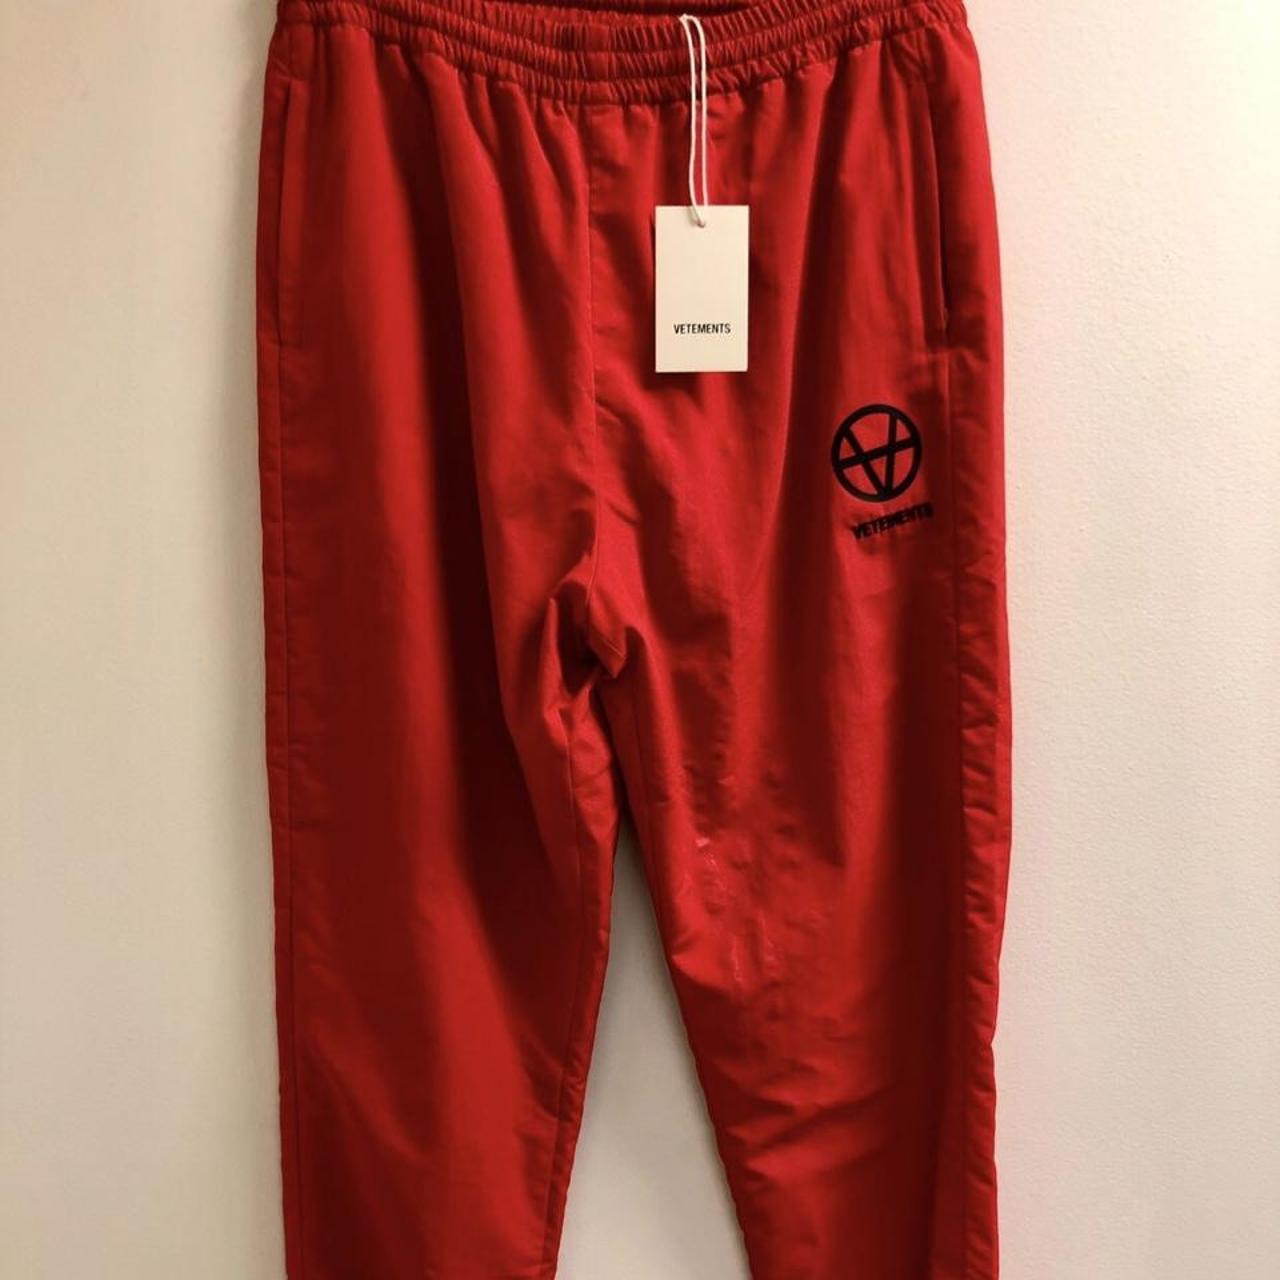 Vetements Red Joggers; Size Medium; Great Used... - Depop